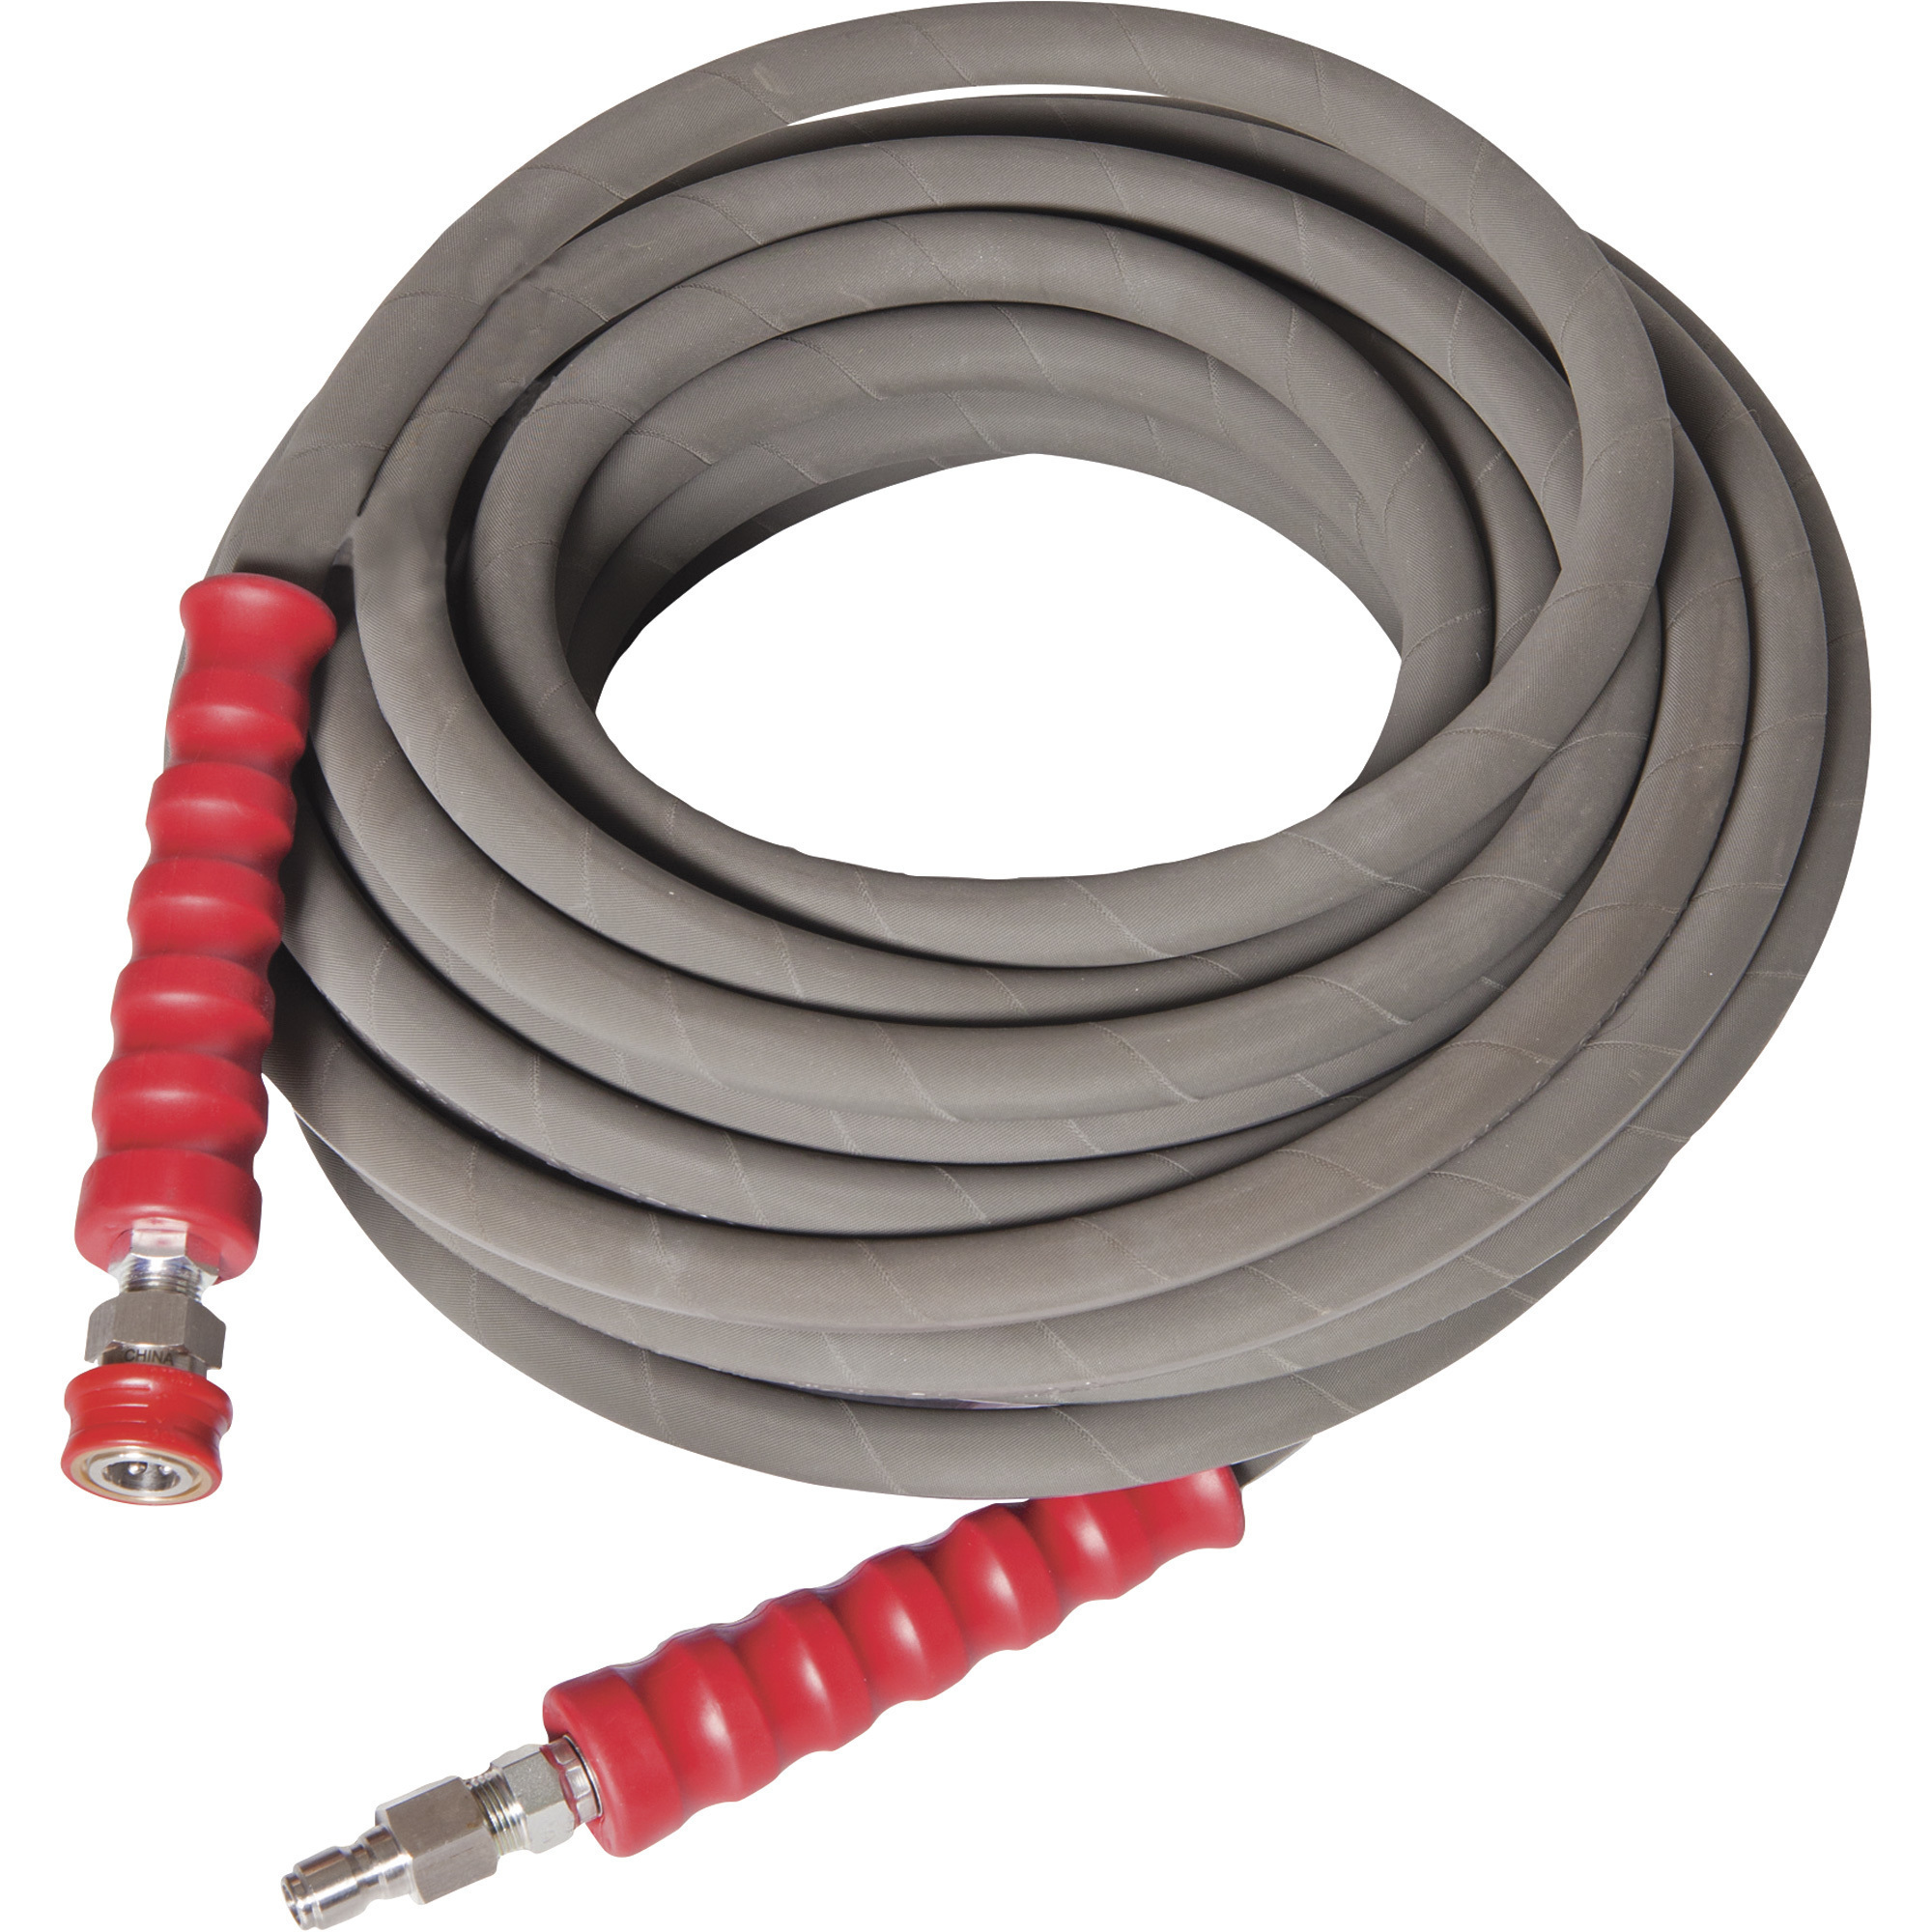 NorthStar Hot Water Nonmarking Pressure Washer Hose, 6000 PSI, 100ft. x 3/8Inch, Model 989401985